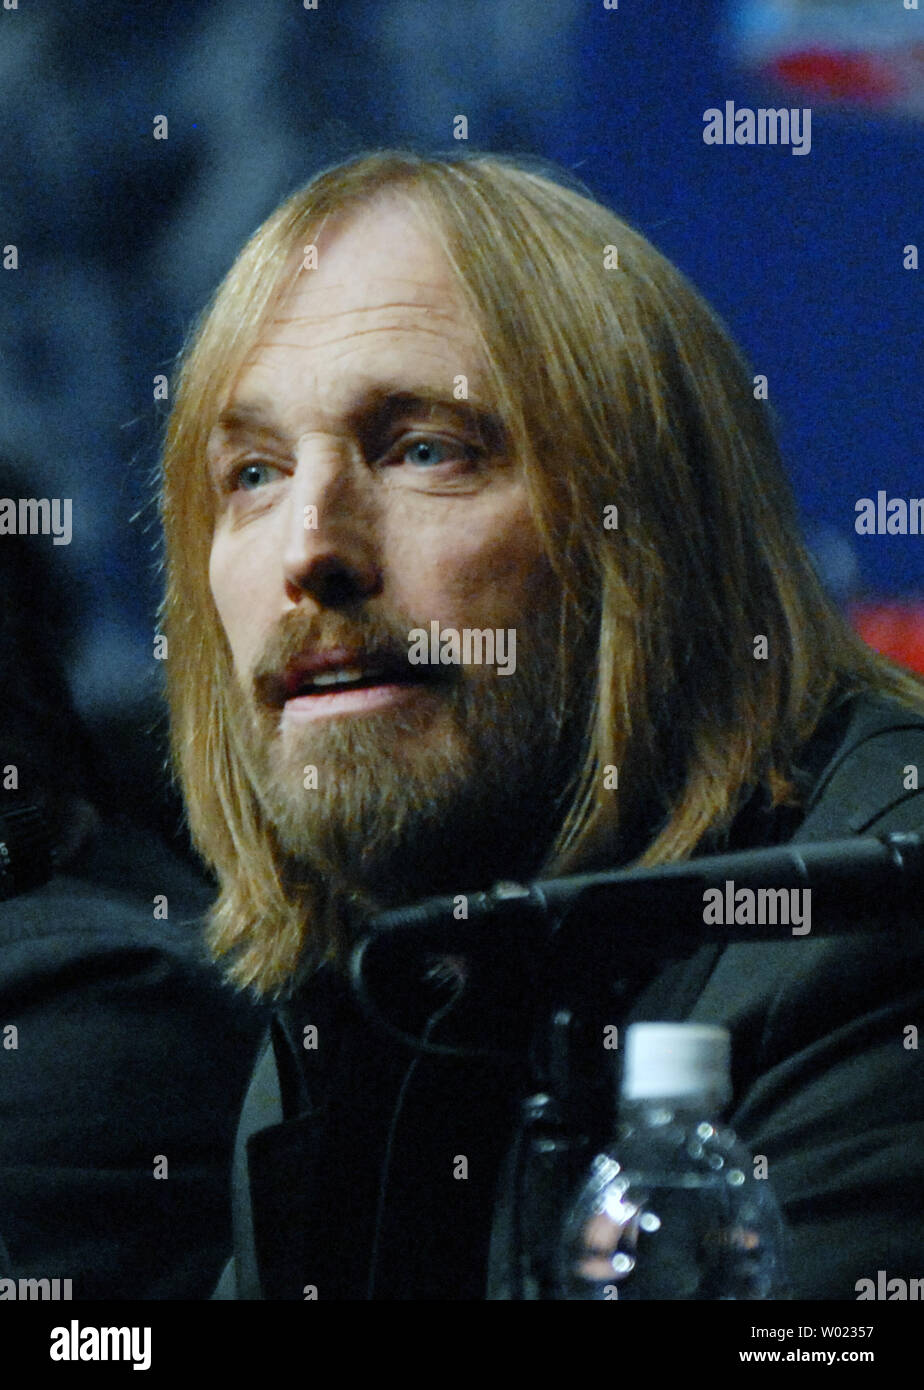 Tom Petty speaks at a press conference at the NFL's Super Bowl XLII media center in Phoenix on January 31, 2008. Tom Petty and the Heartbreakers will perform at the Super Bowl XLII Halftime Show. (UPI Photo/Alexis C. Glenn) Stock Photo